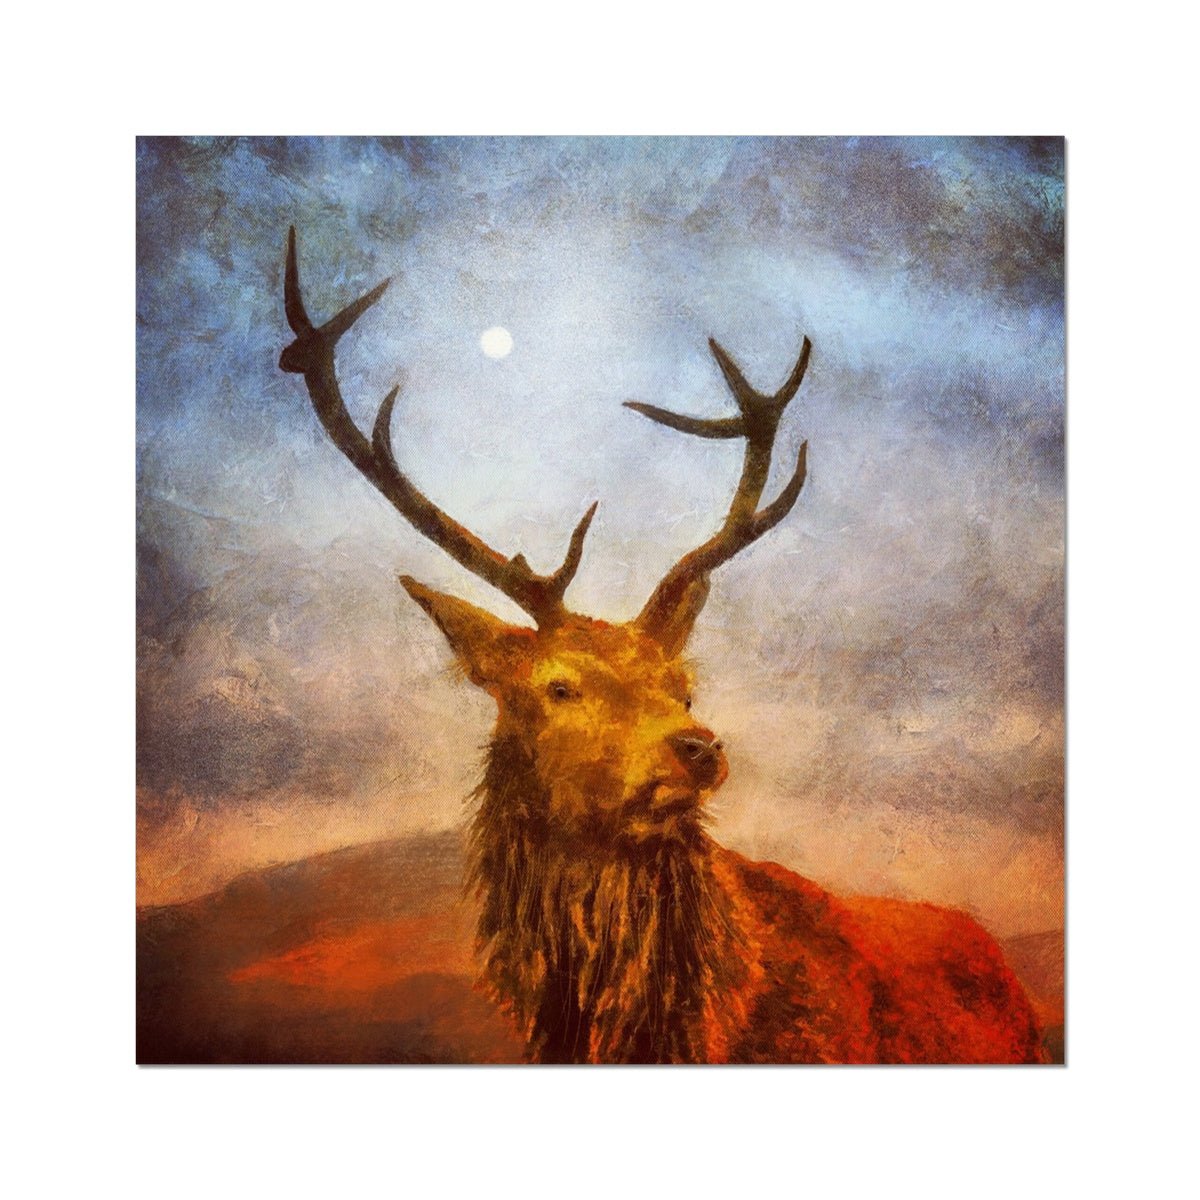 A Moonlit Highland Stag Painting | Fine Art Prints From Scotland-Unframed Prints-Scottish Highlands & Lowlands Art Gallery-24"x24"-Paintings, Prints, Homeware, Art Gifts From Scotland By Scottish Artist Kevin Hunter